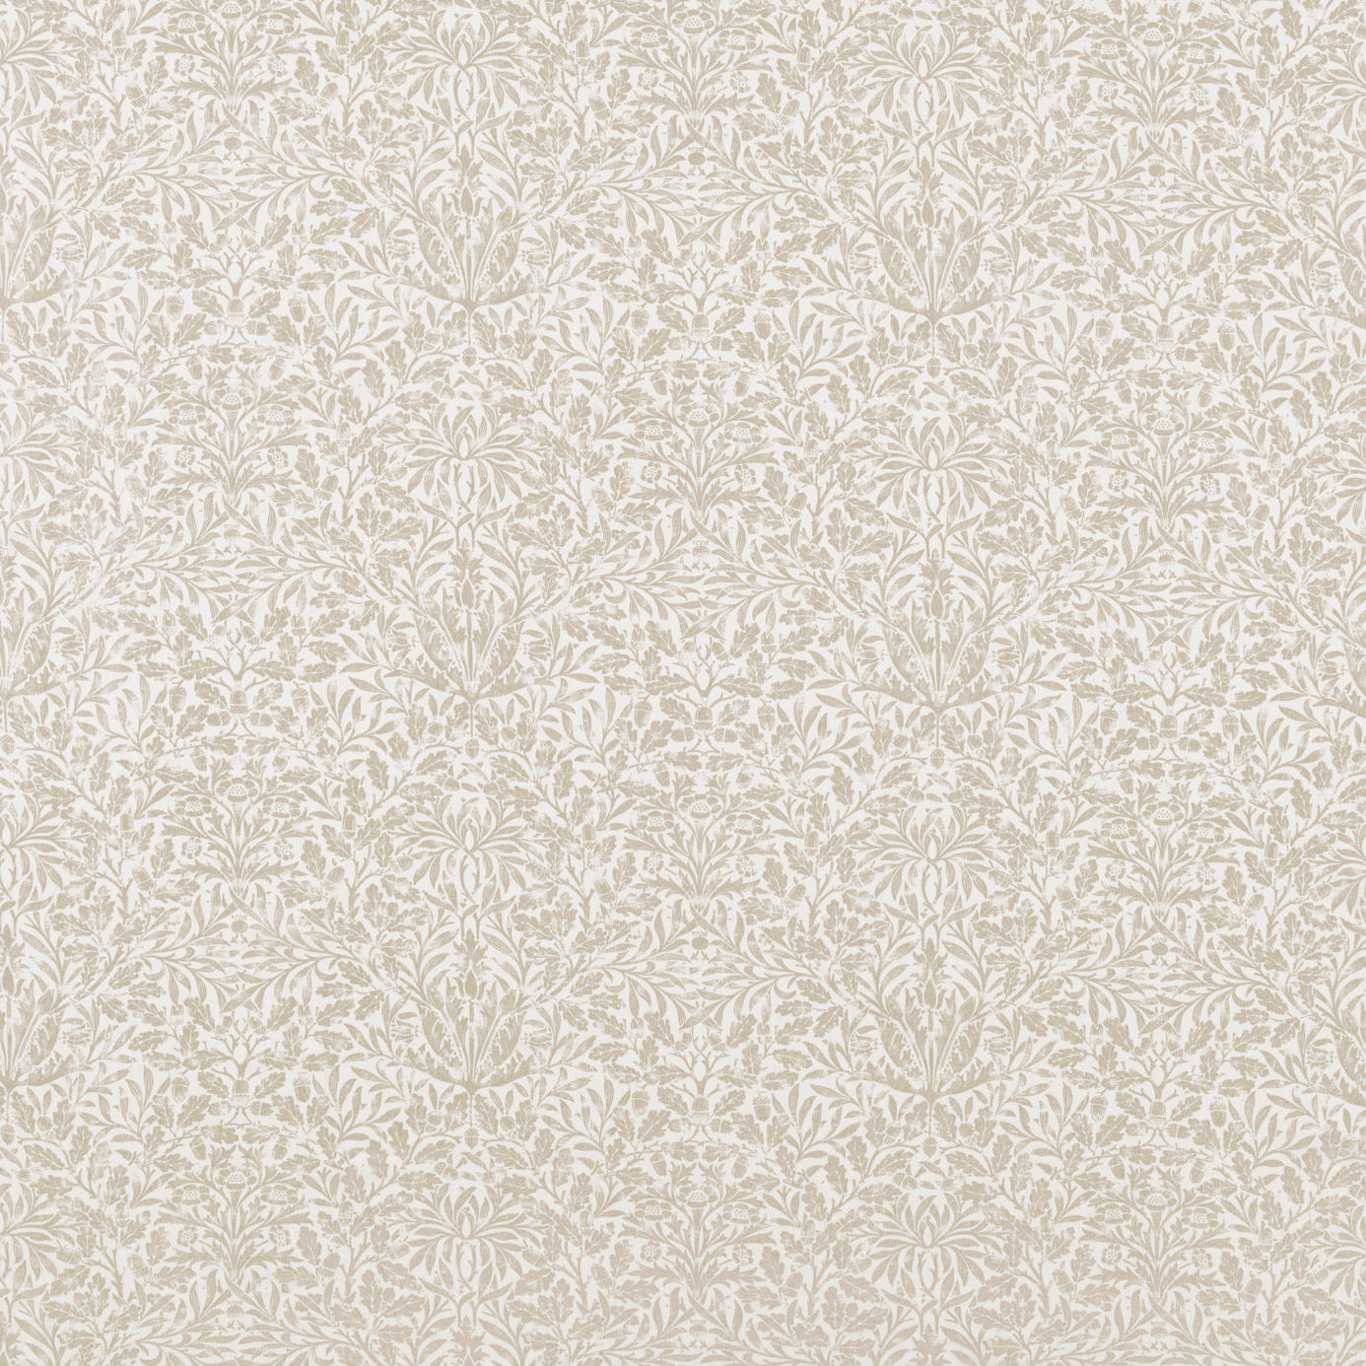 Pure Acorn Linen Fabric by MOR